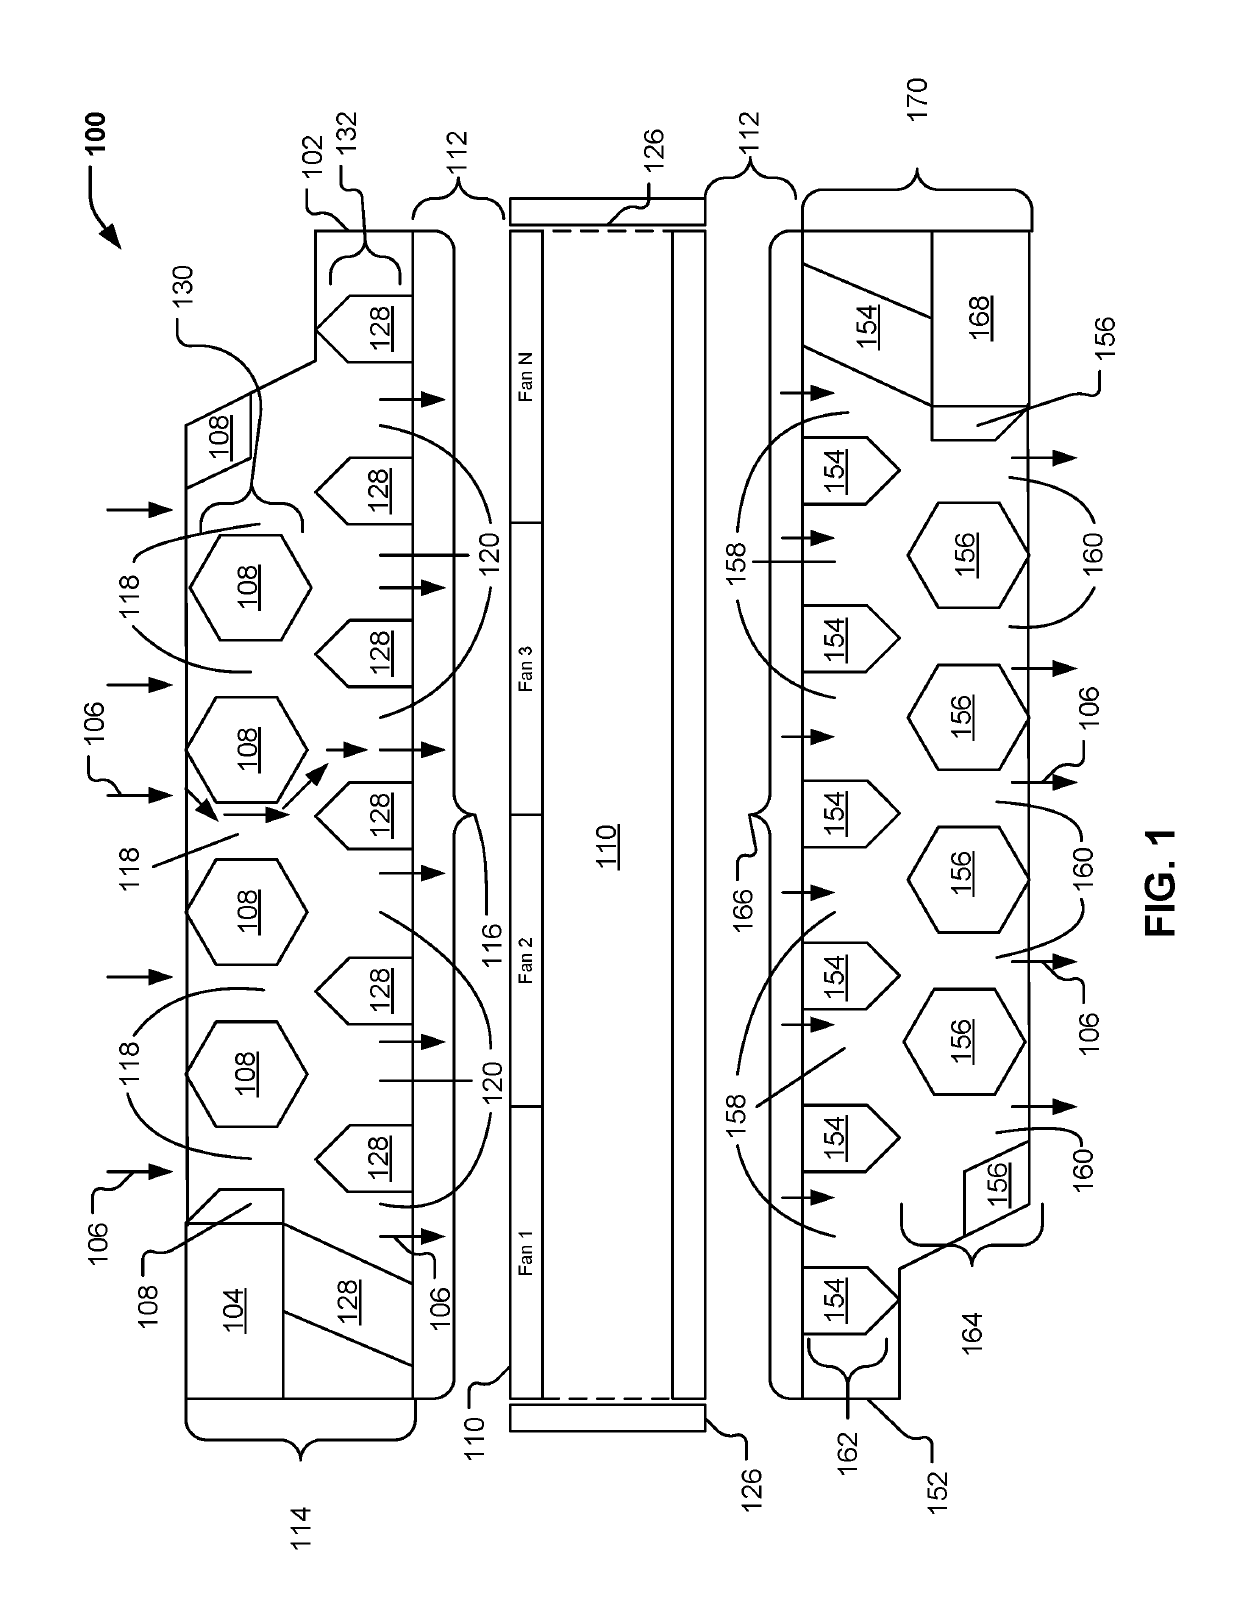 Method and apparatus for acoustical noise reduction and distributed airflow